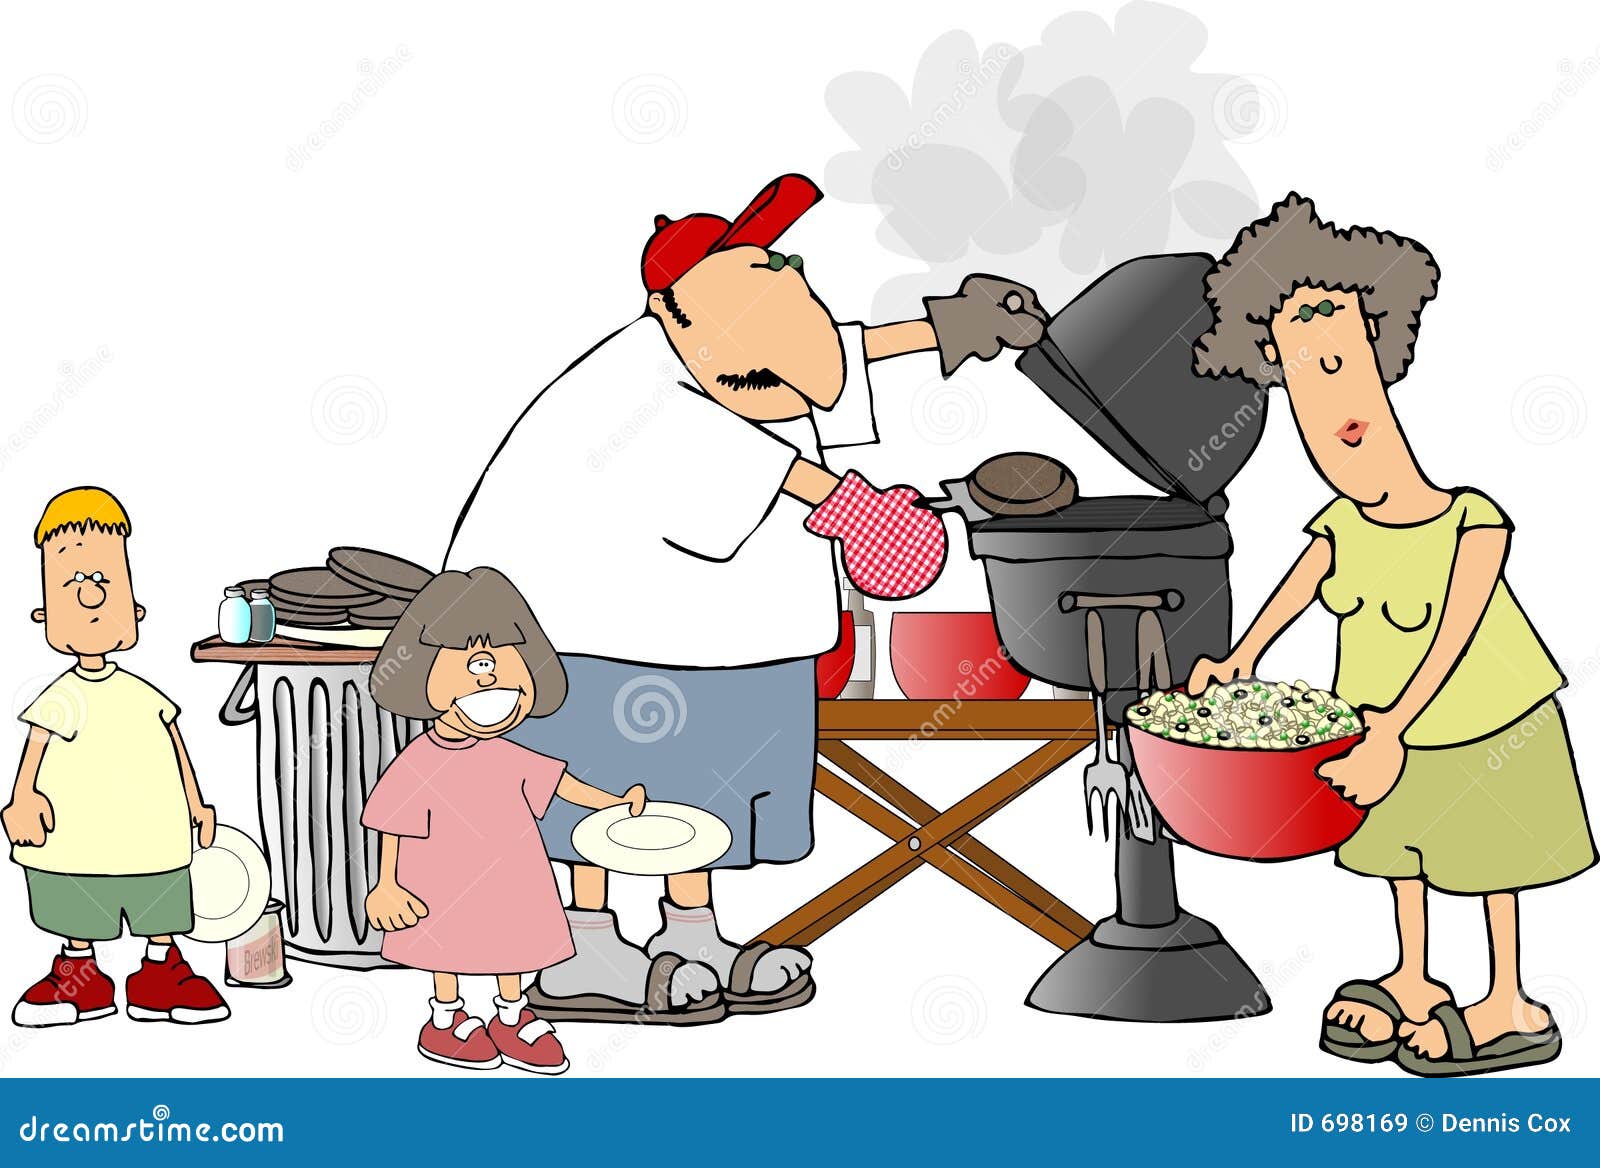 family barbecue clipart - photo #11